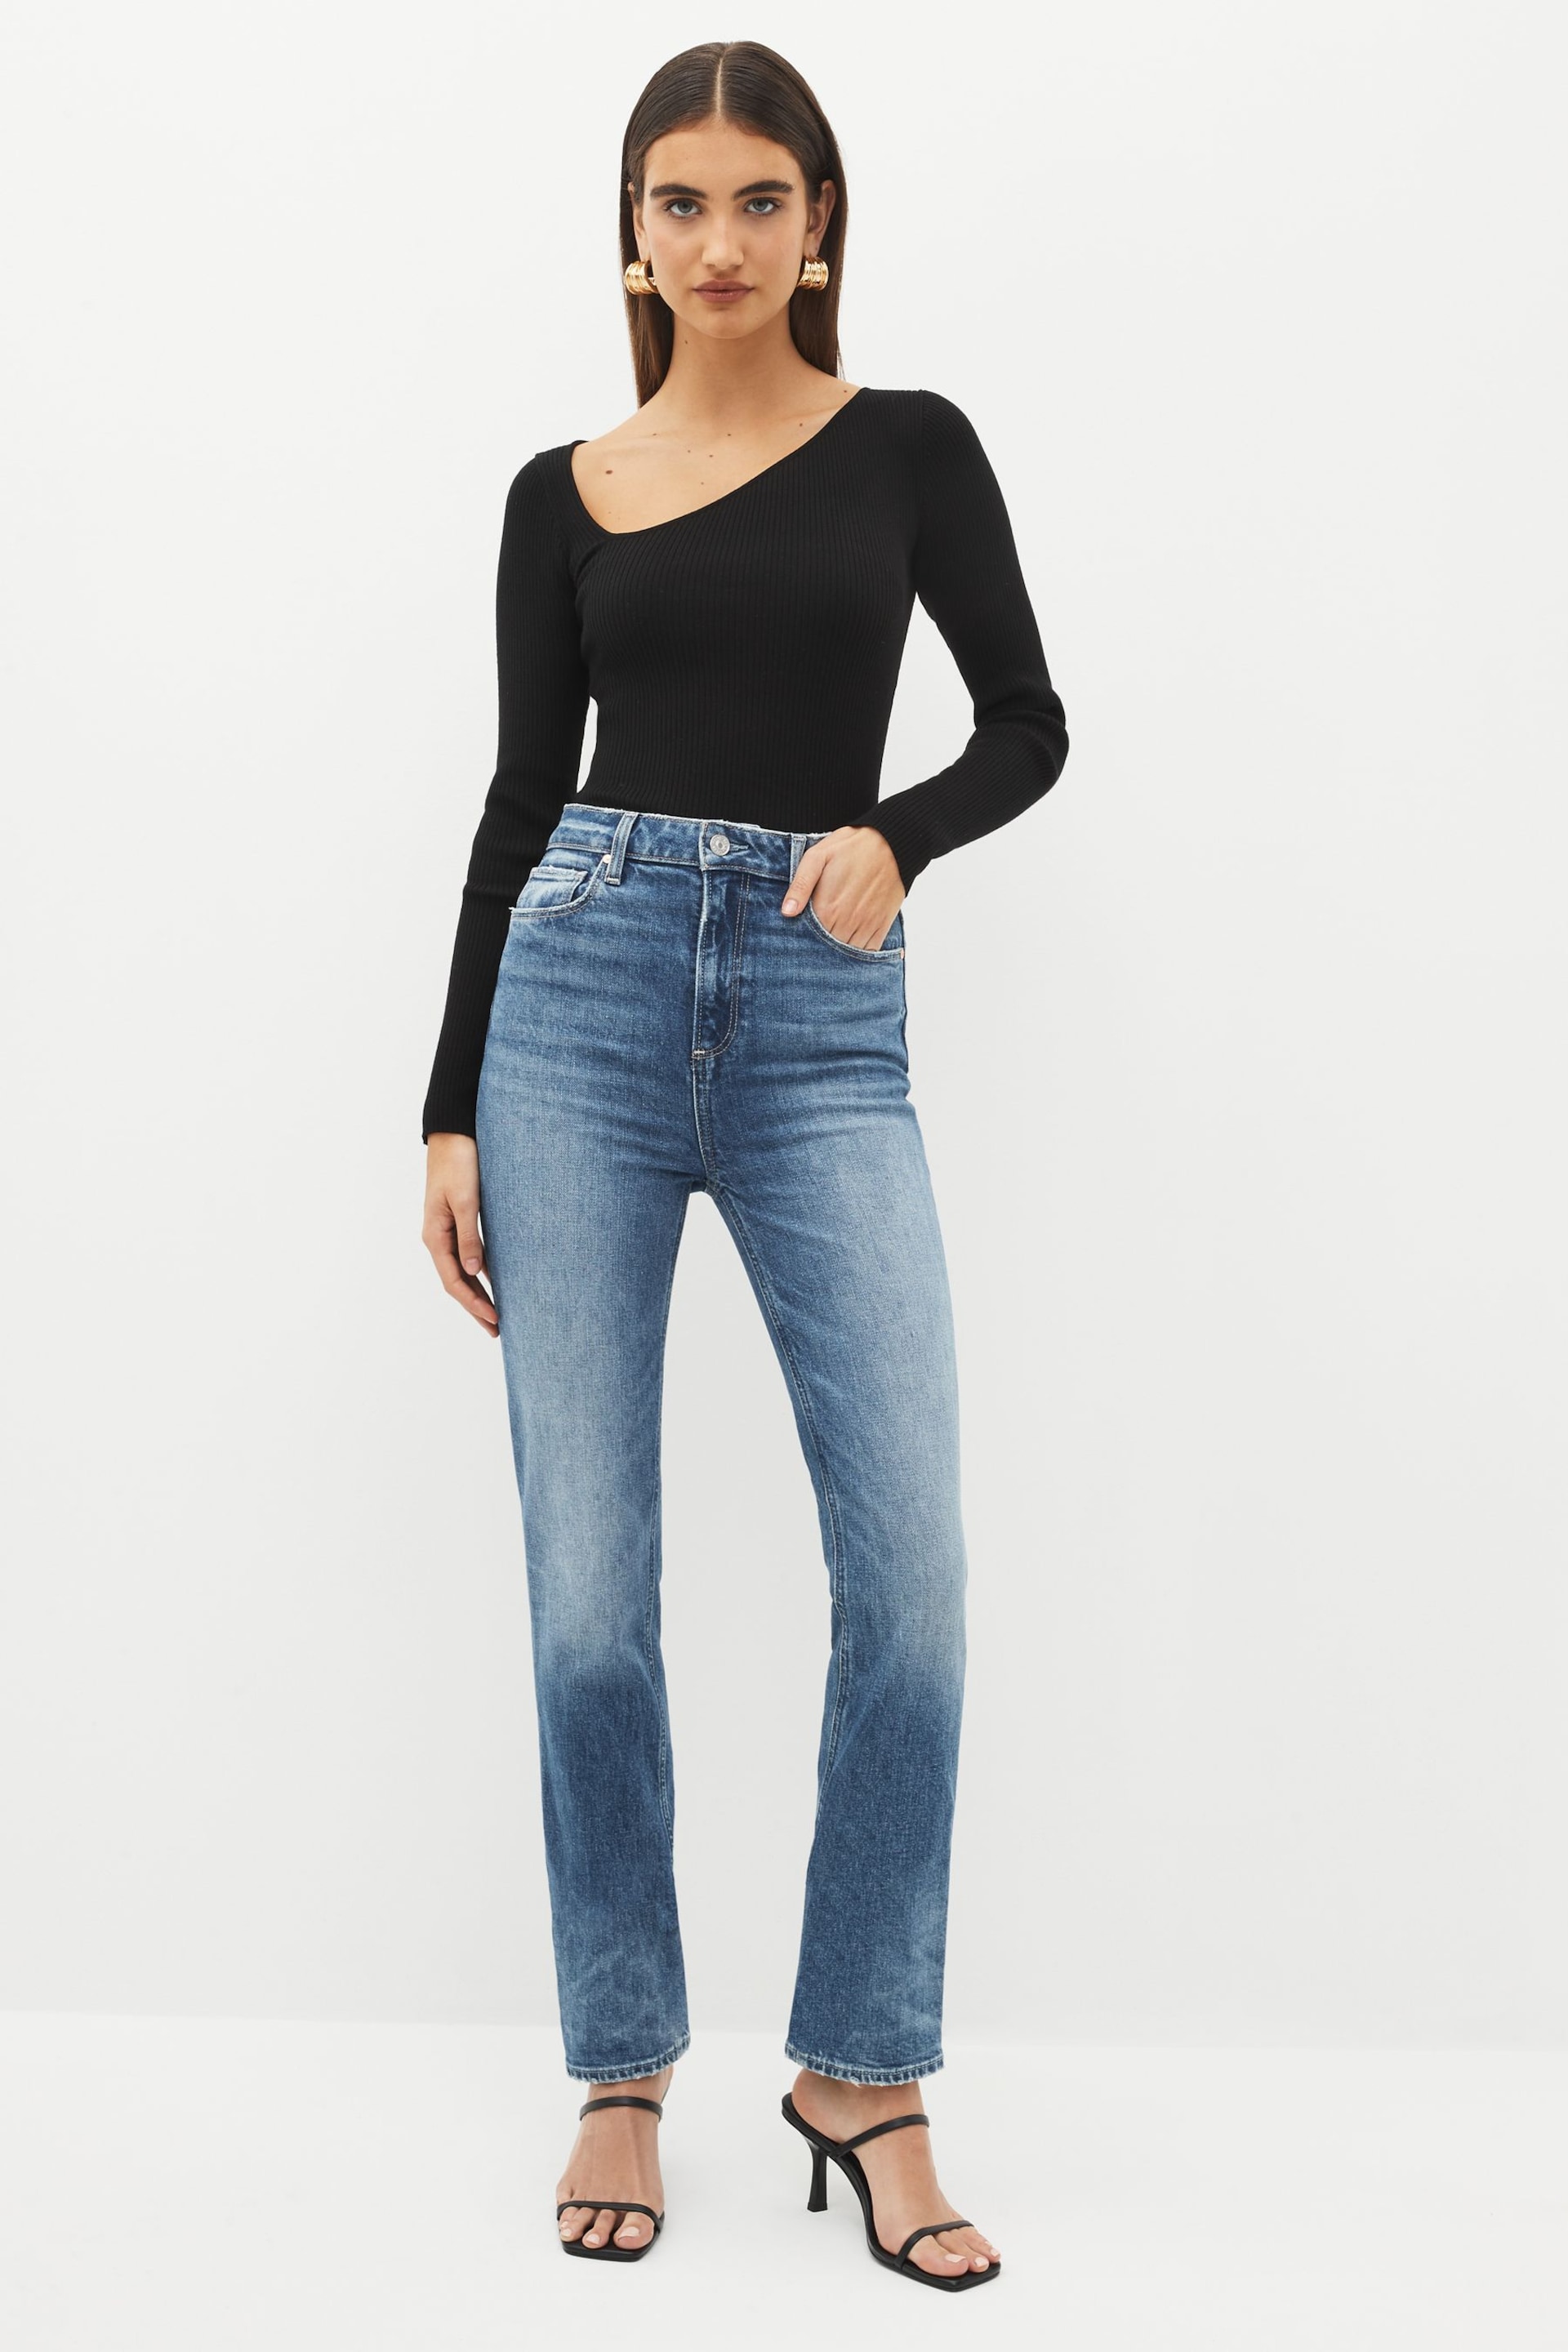 Paige Blue Stella Straight 31" Jeans - Image 3 of 5